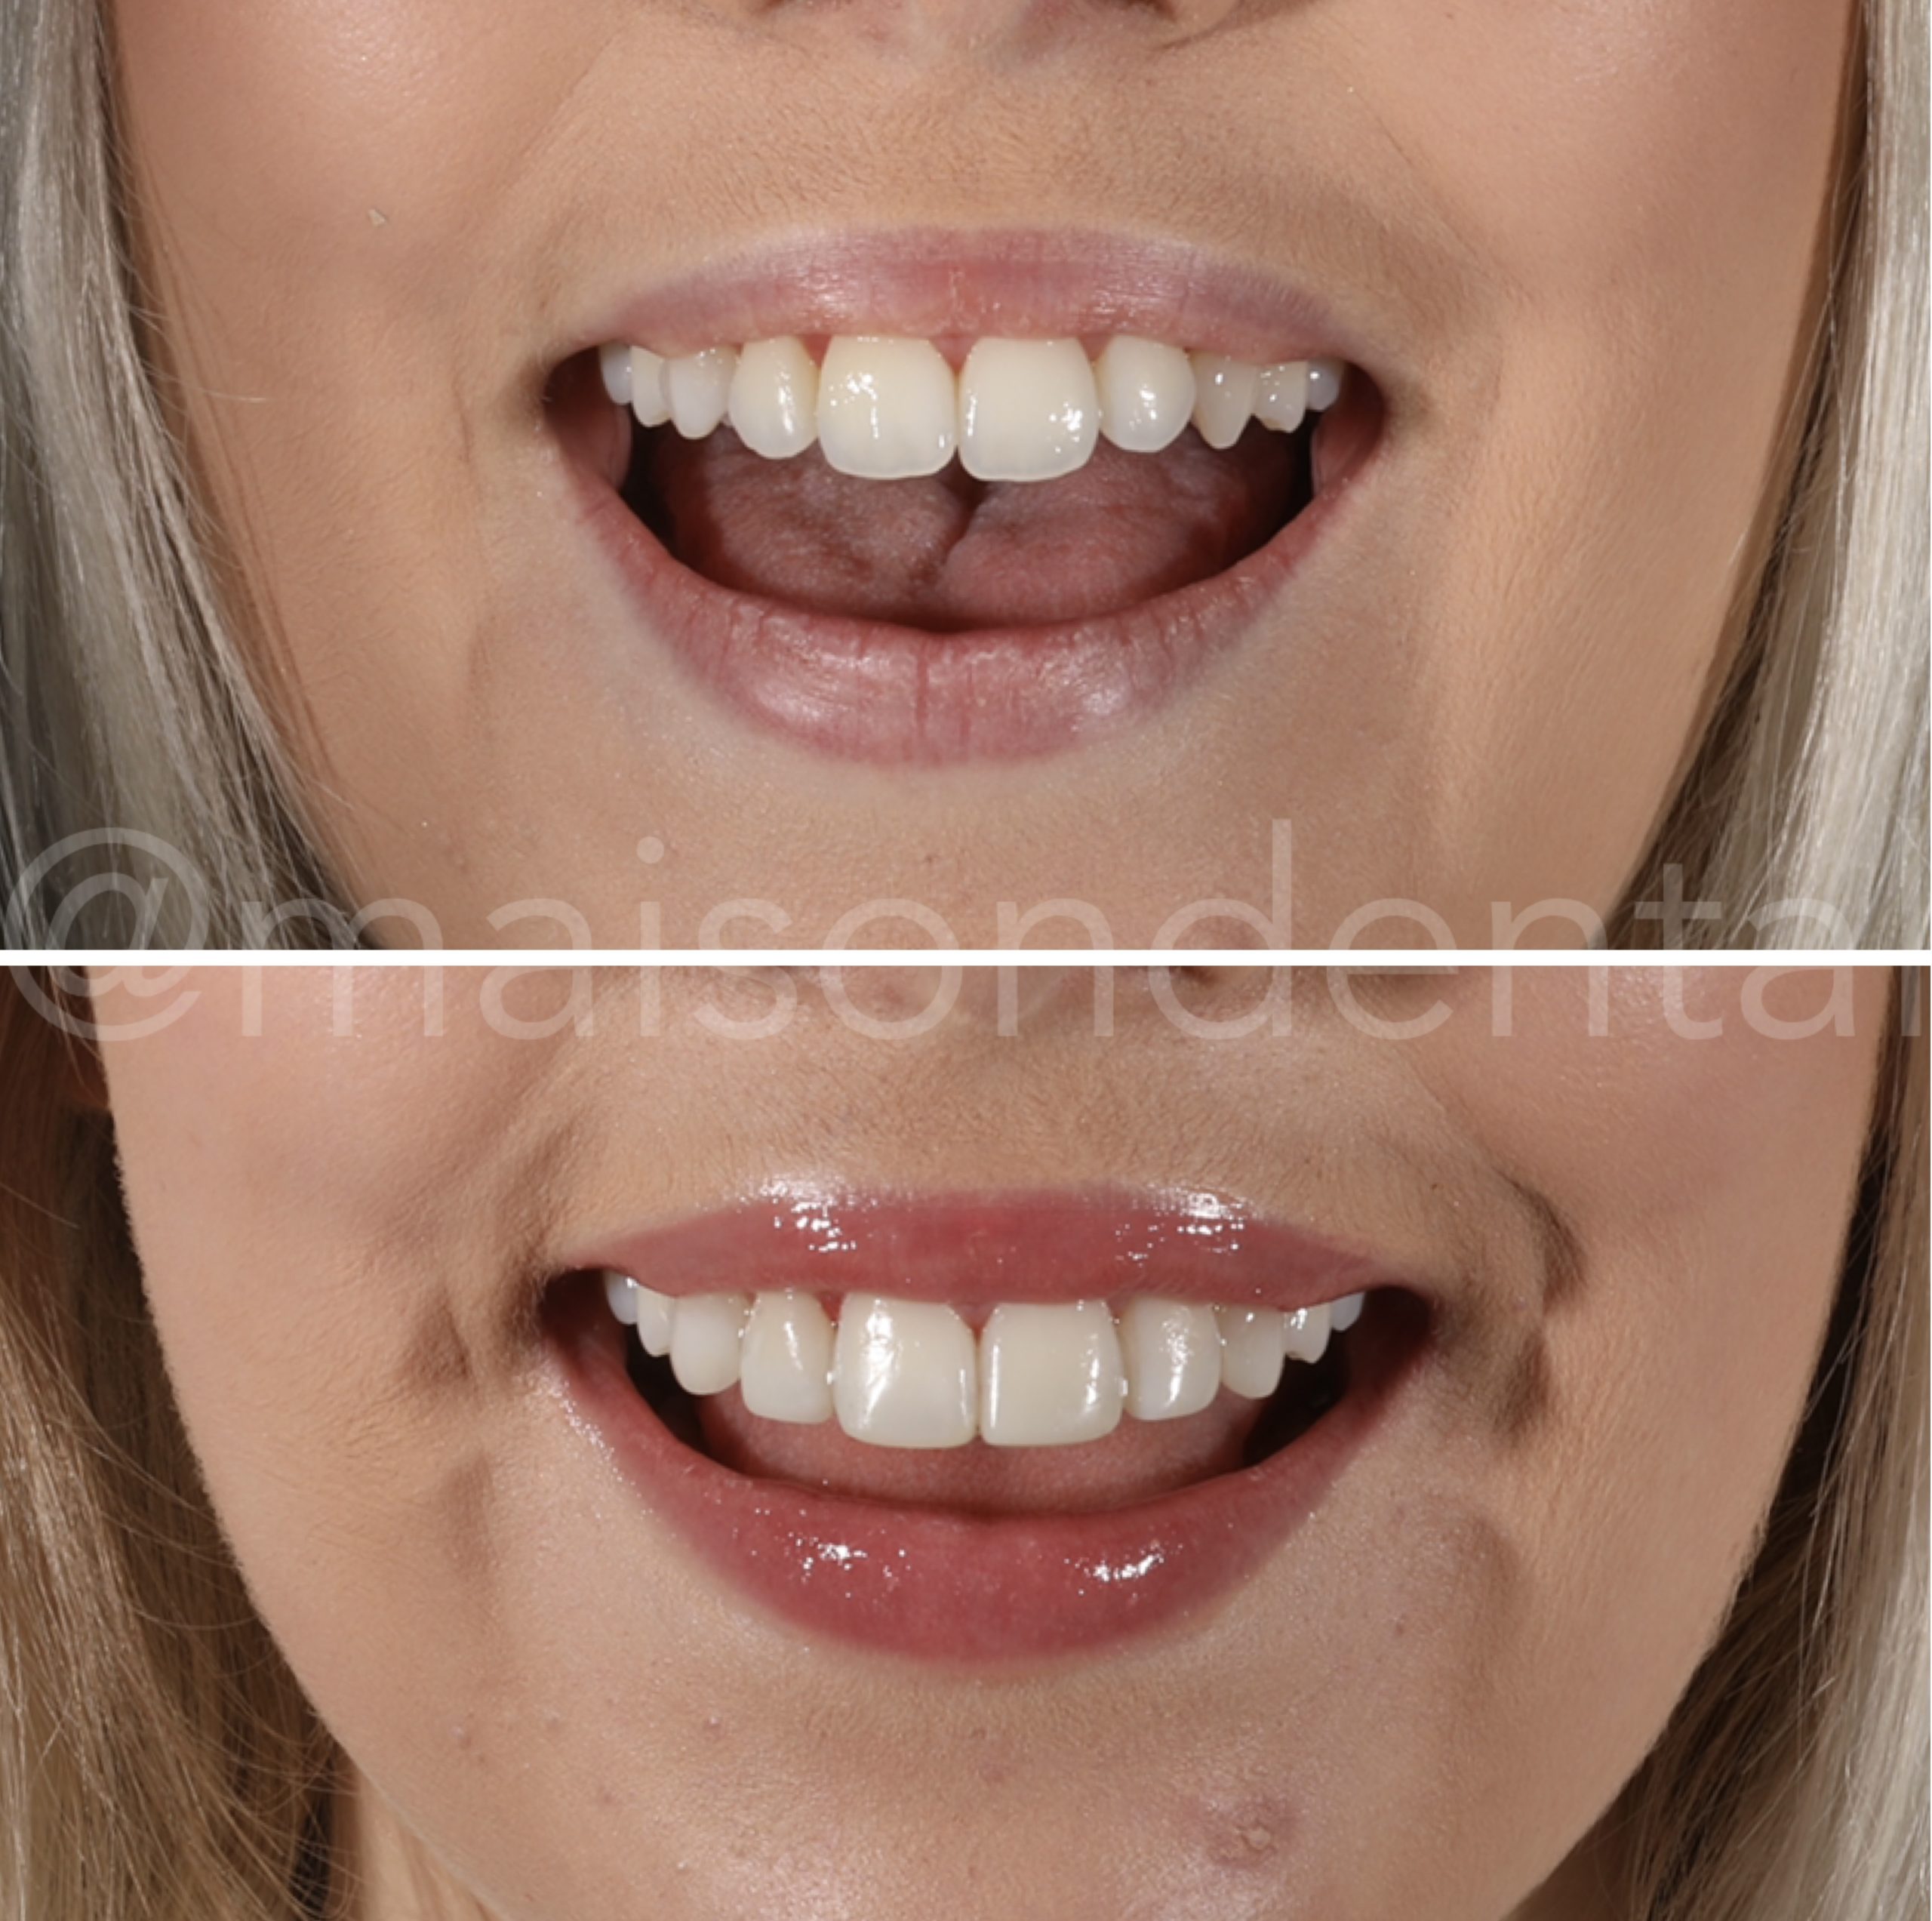 Composite Bonding to Produce a Less Rounded Appearance of the Teeth